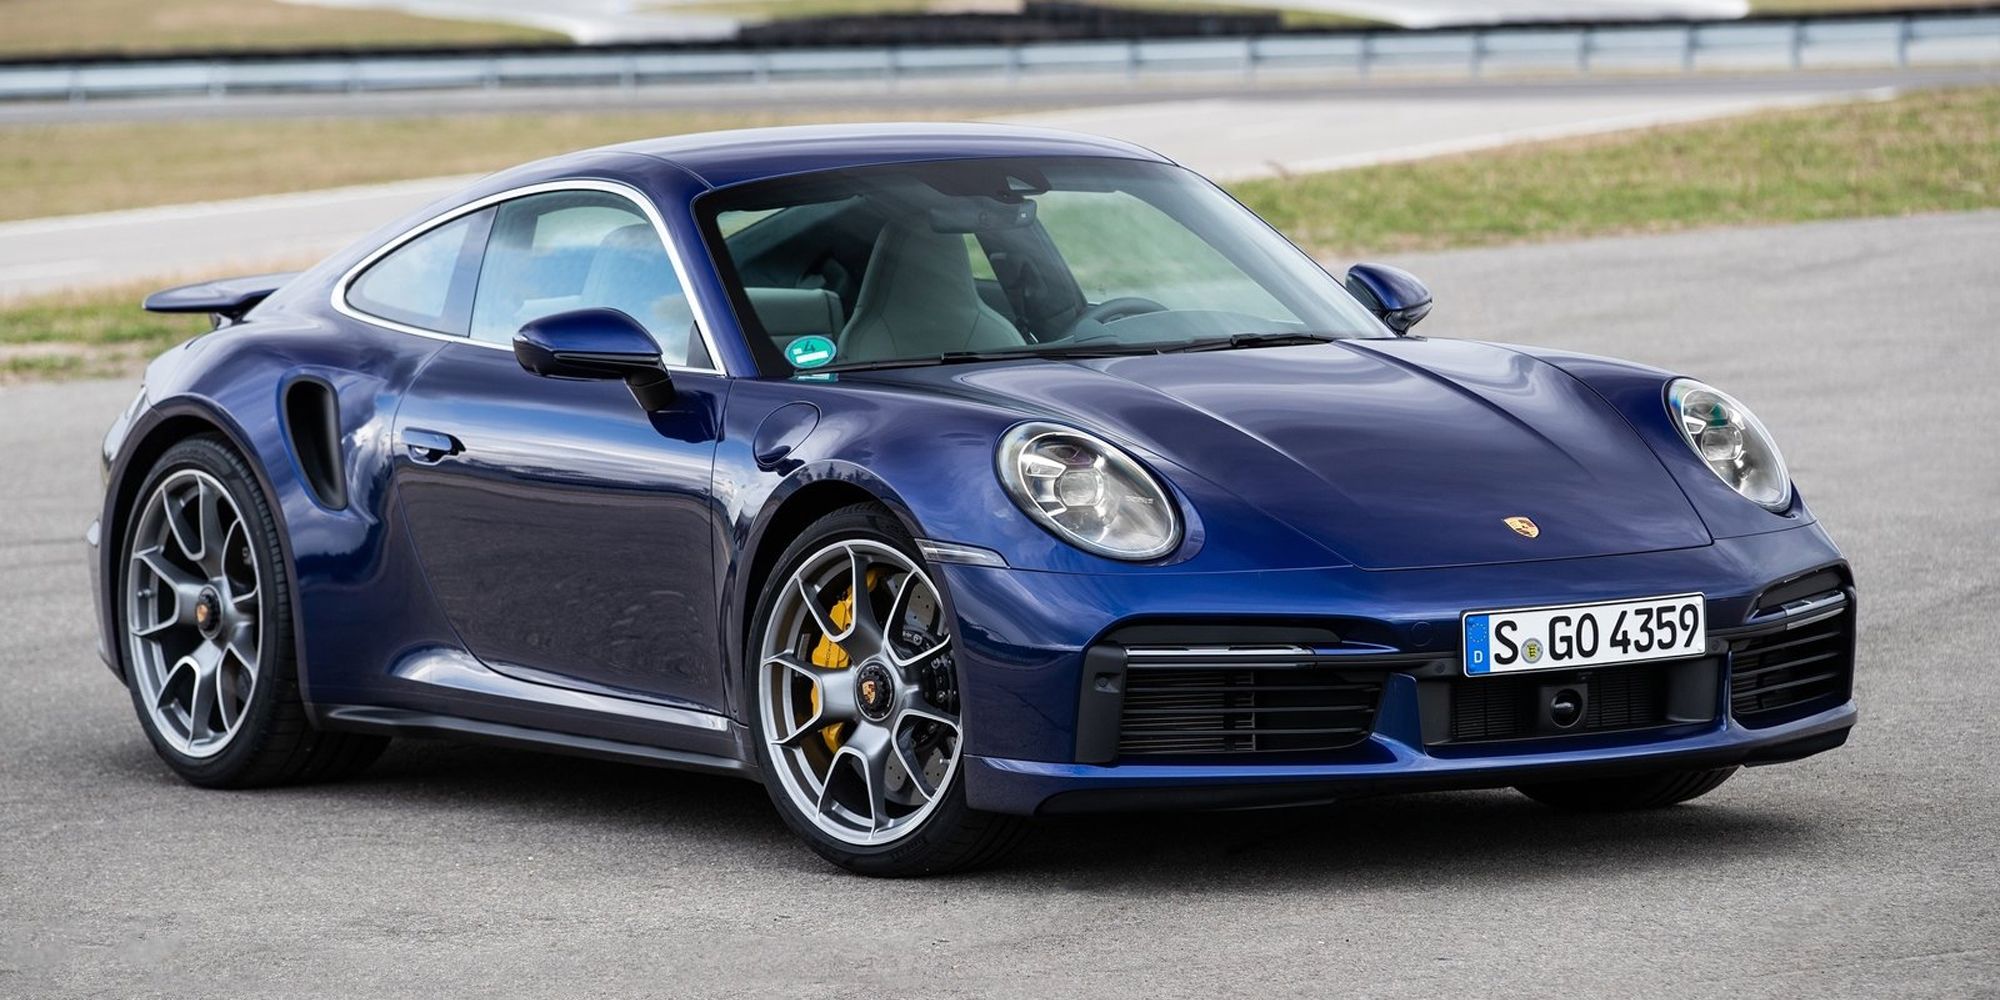 The front of the 992 Turbo S